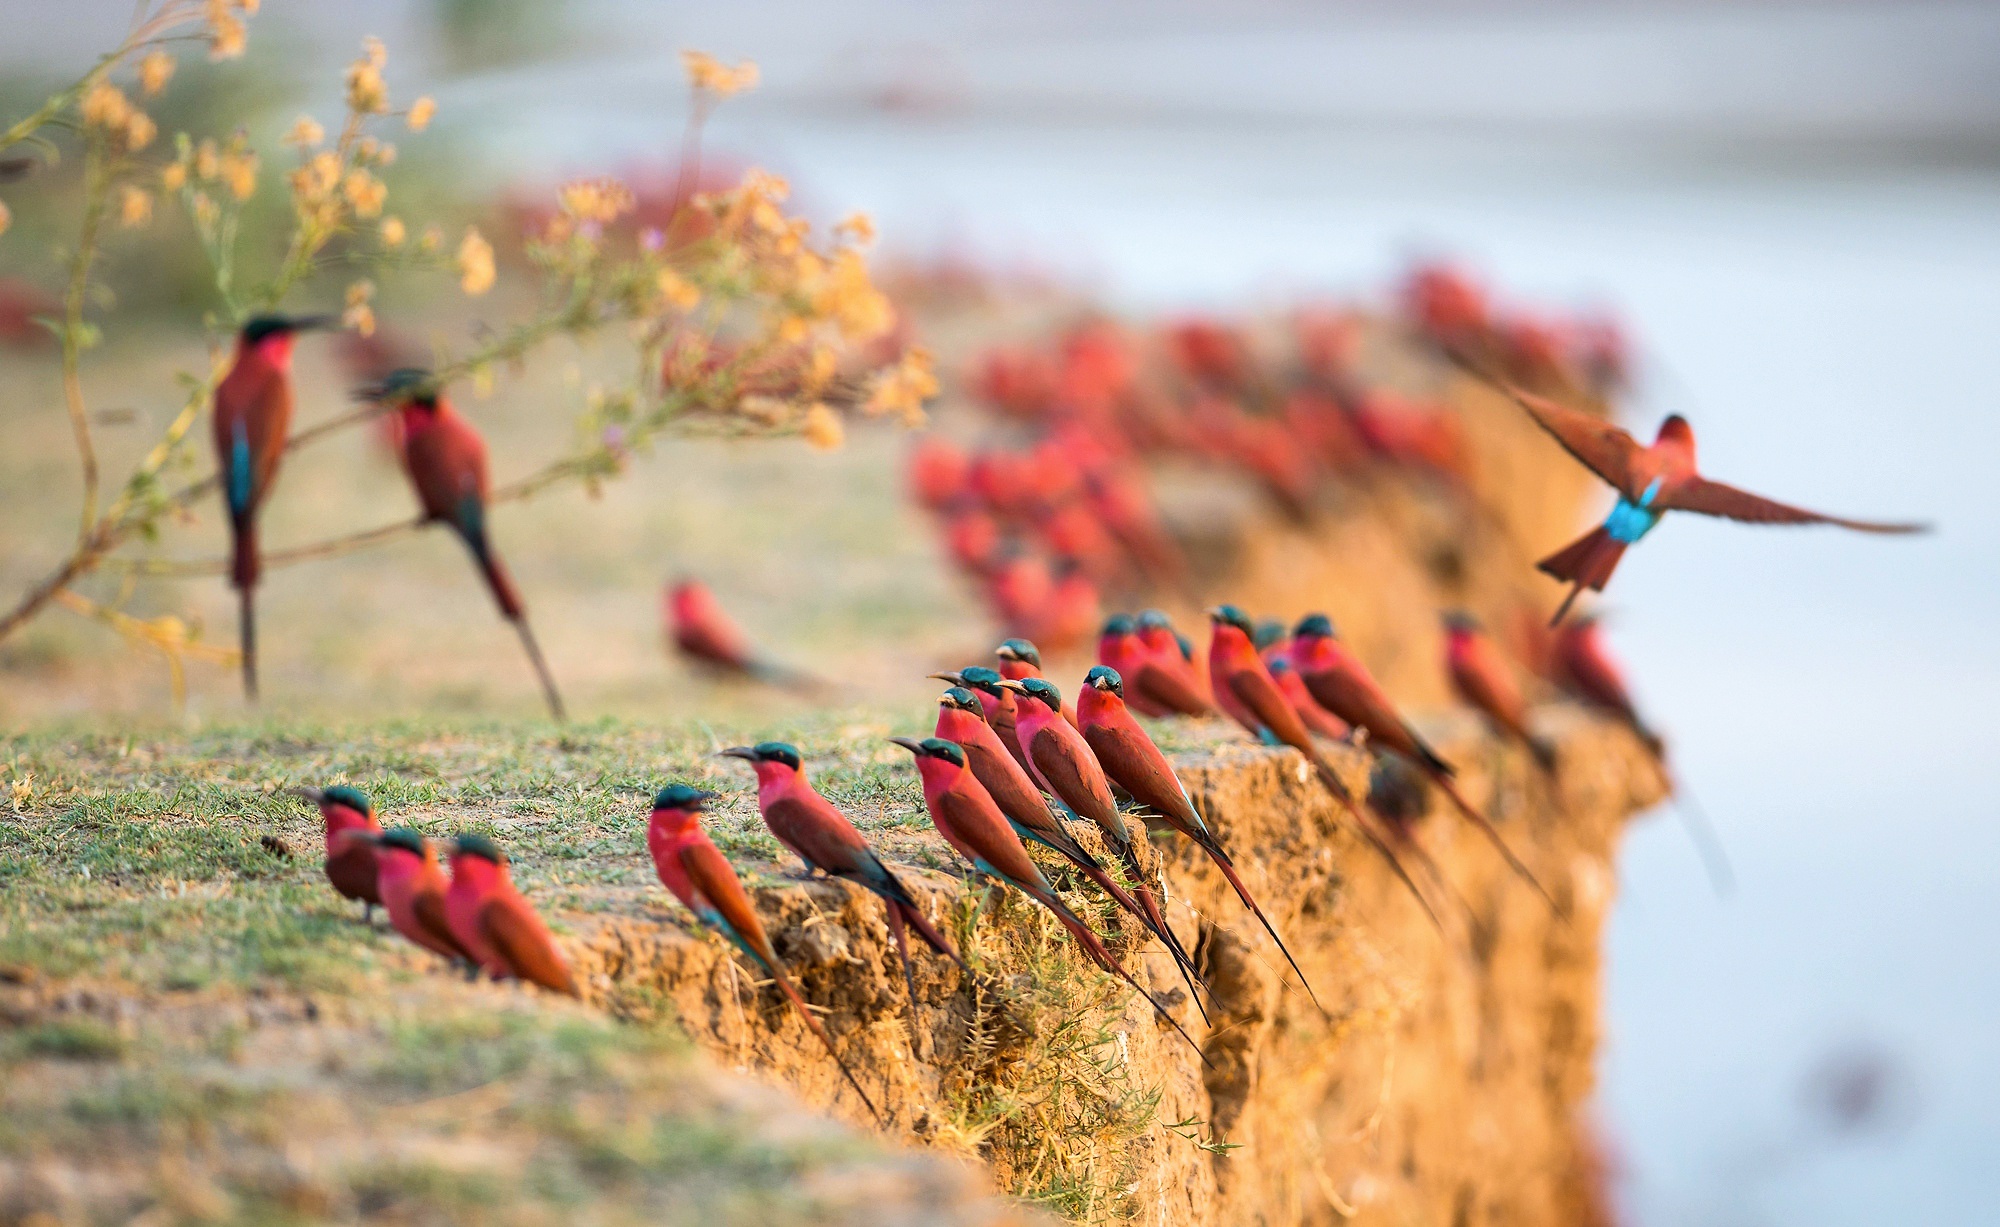 Carmine bee-eaters, South Luangwa, Zambia by Will Burrard-Lucas